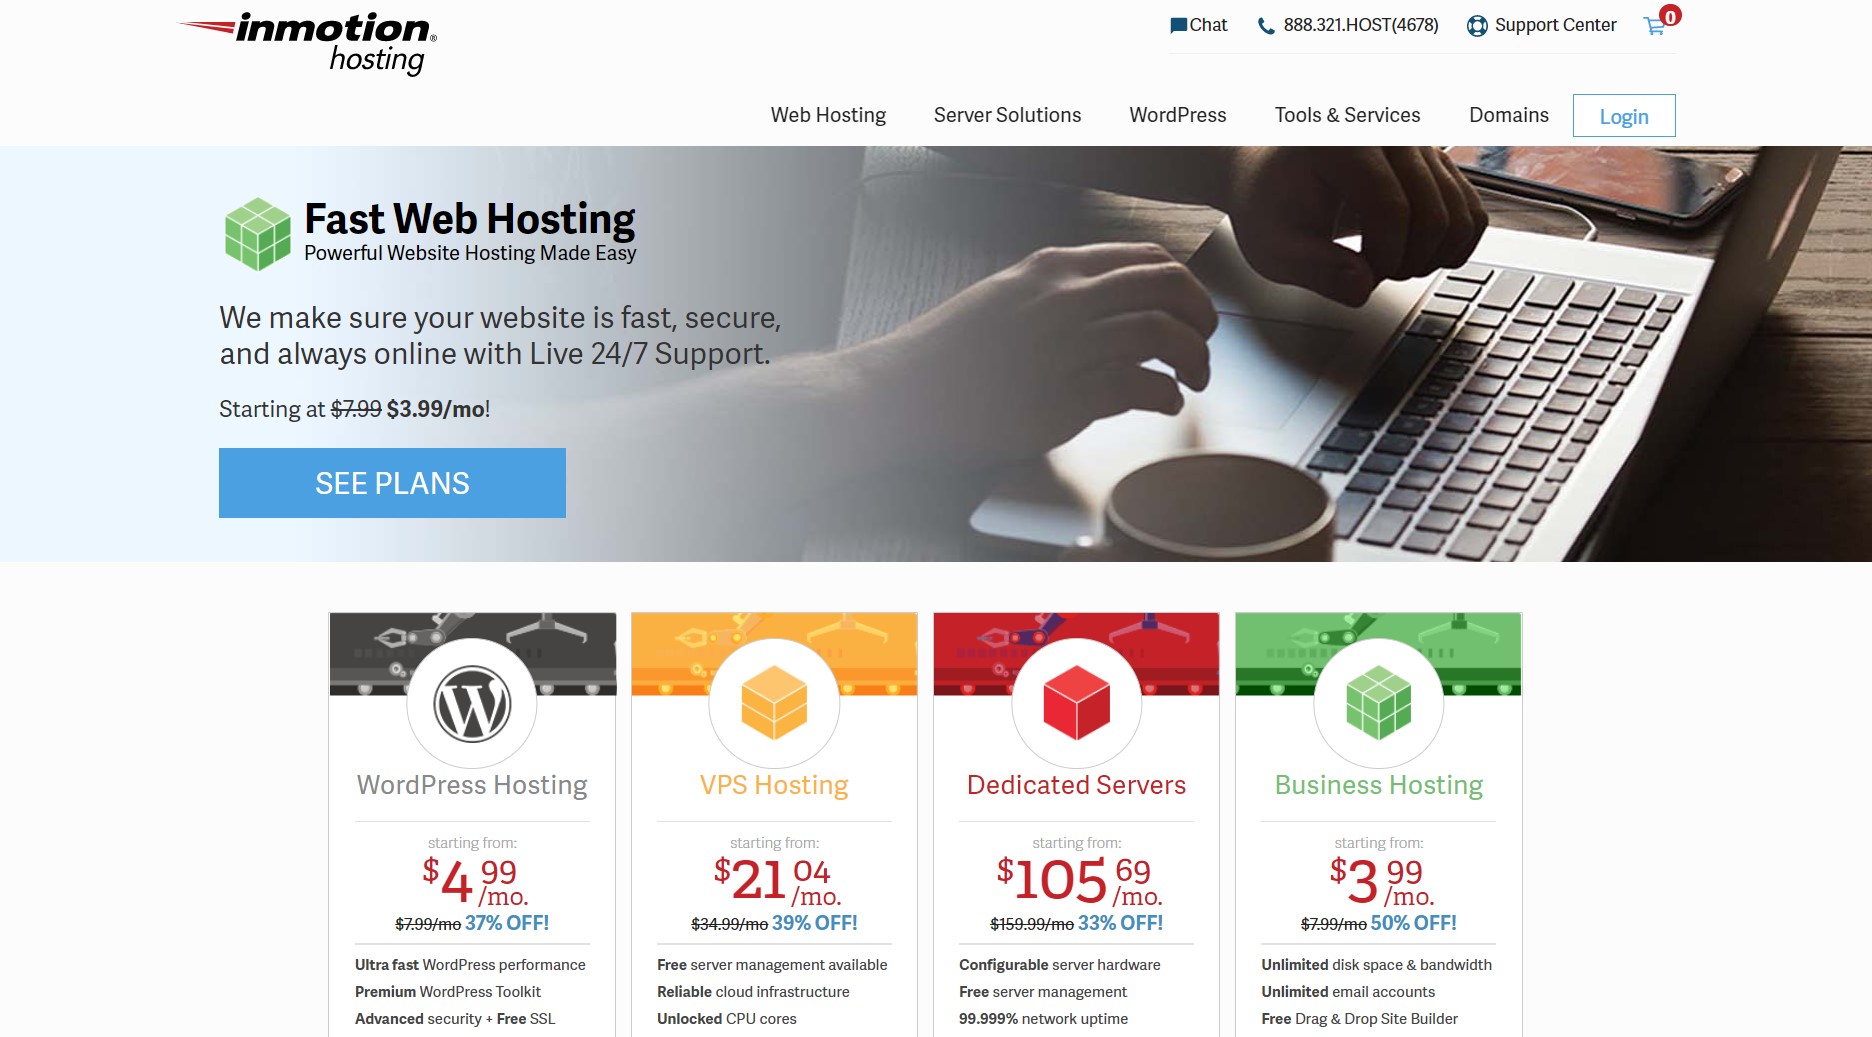 Inmotion Hosting Review Fast Trustworthy Host 2020 Images, Photos, Reviews